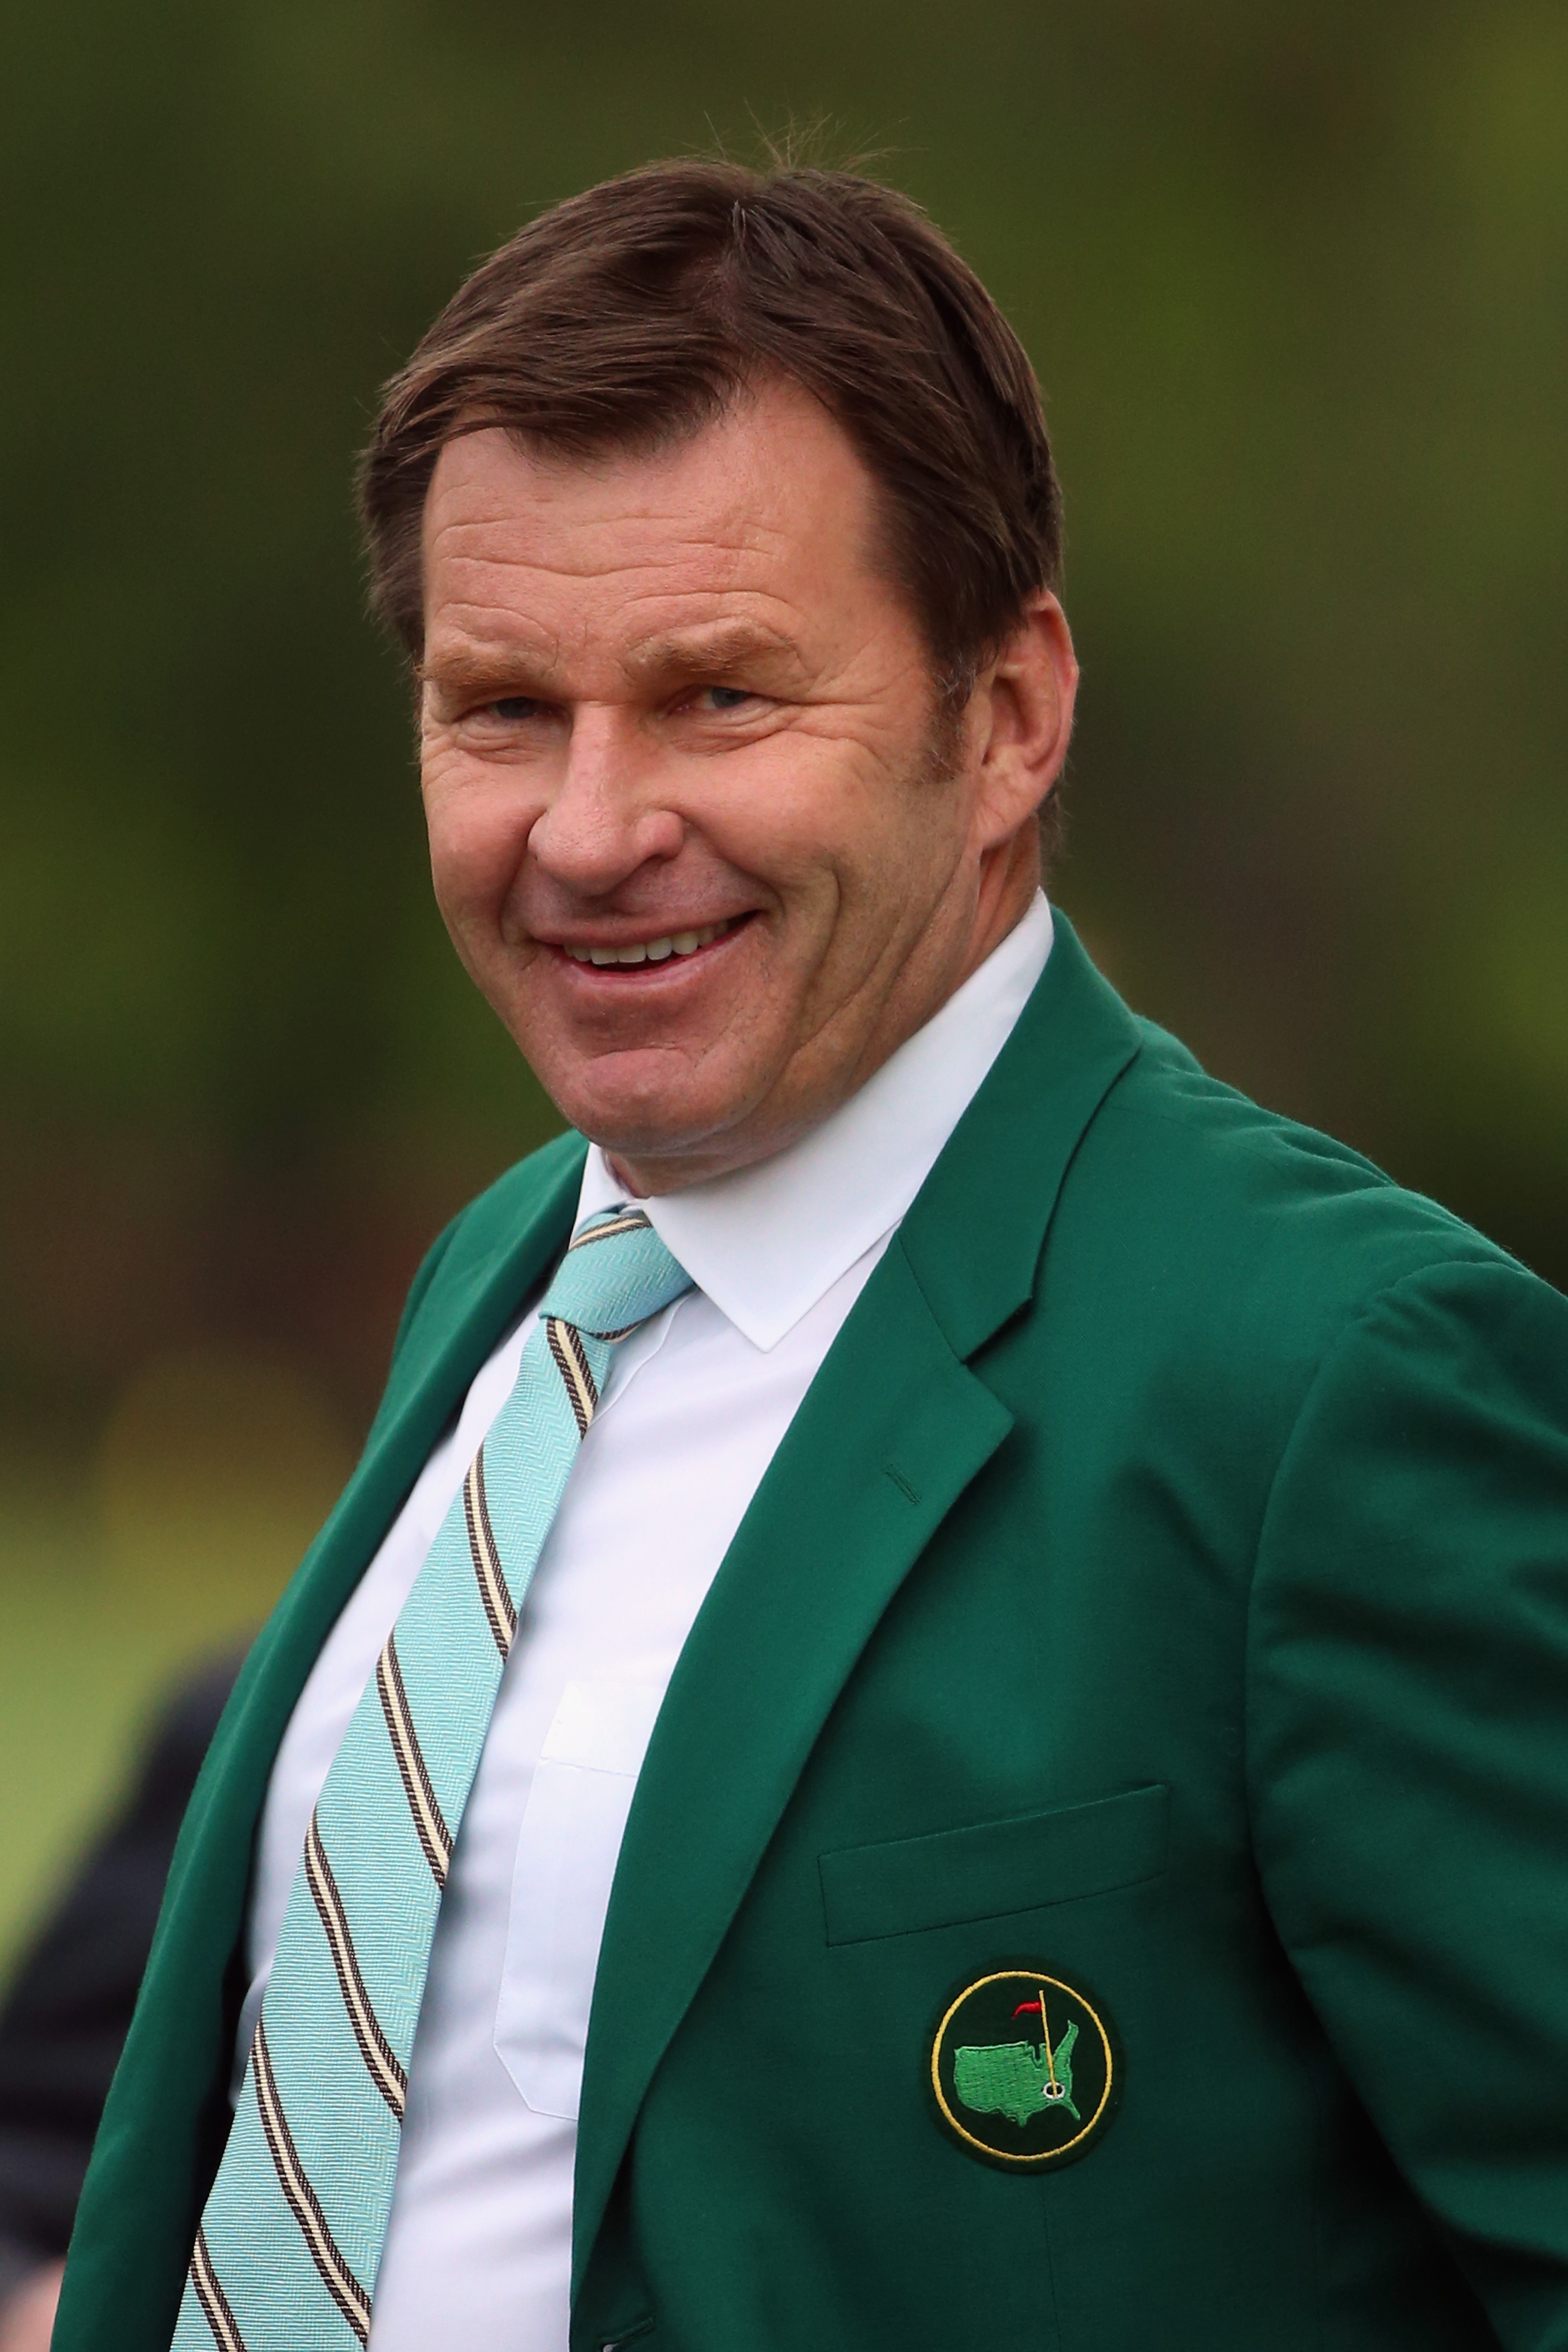 AUGUSTA, GA - APRIL 06: Sir Nick Faldo looks on during a practice round prior to the start of the 2015 Masters Tournament at Augusta National Golf Club on April 6, 2015 in Augusta, Georgia. (Photo by Andrew Redington/Getty Images)